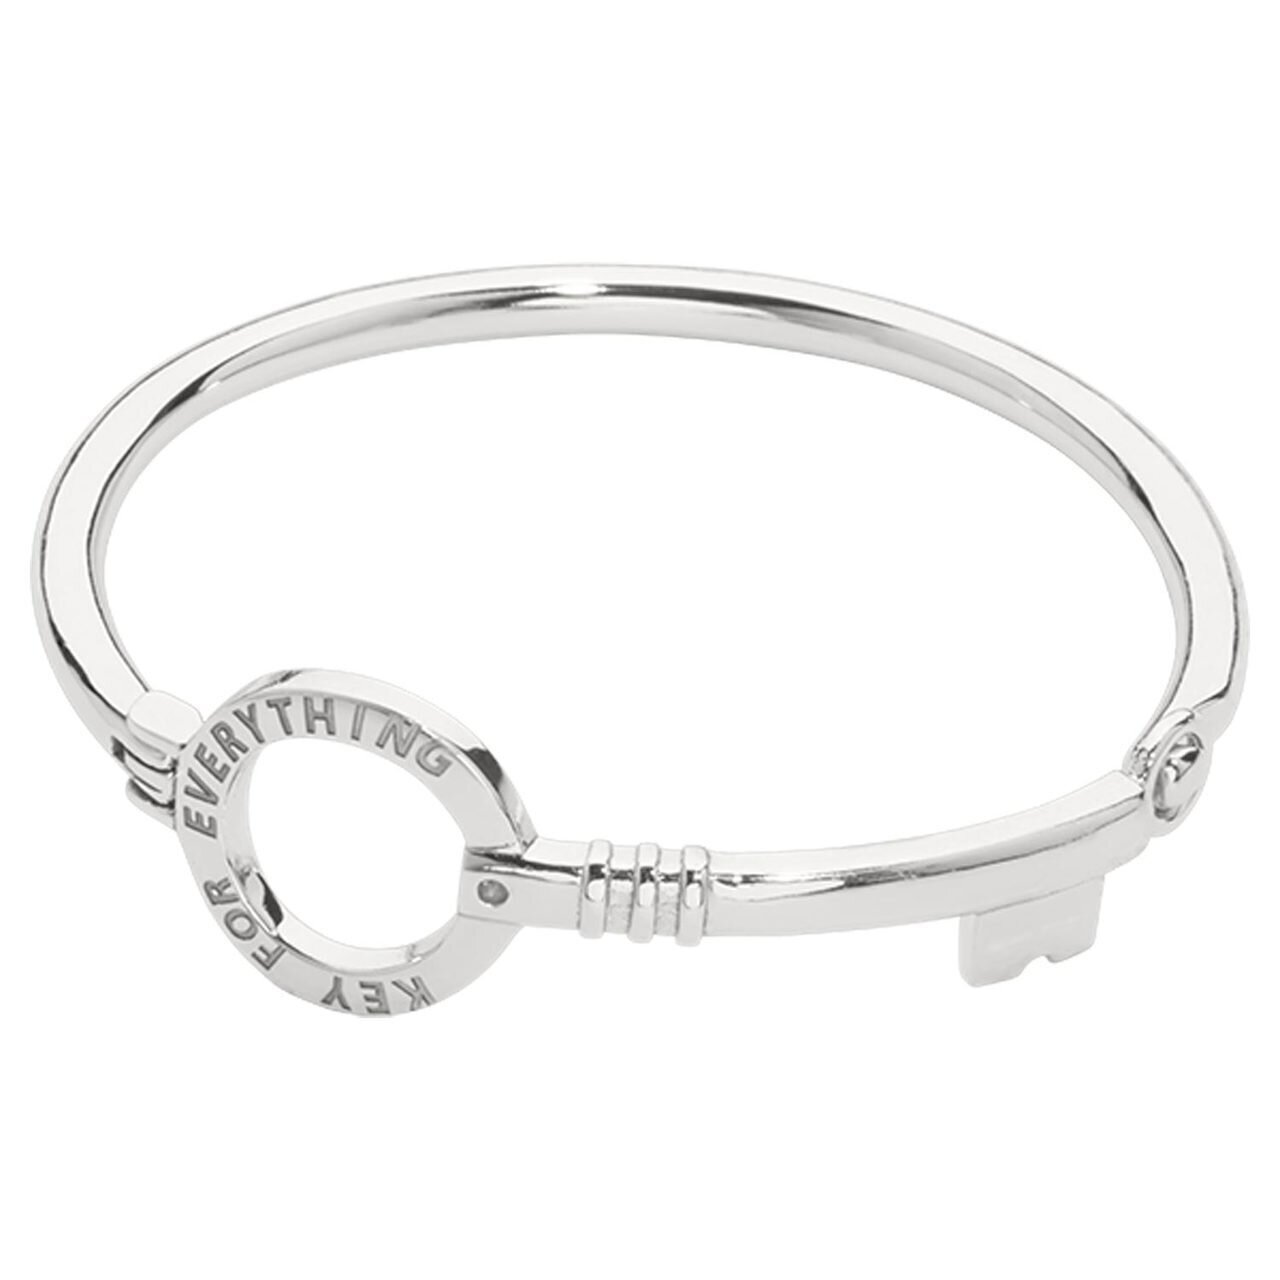 Nikki Lissoni Bracelet with Key To Everything Tag Silver-plated 21cm B1135S21